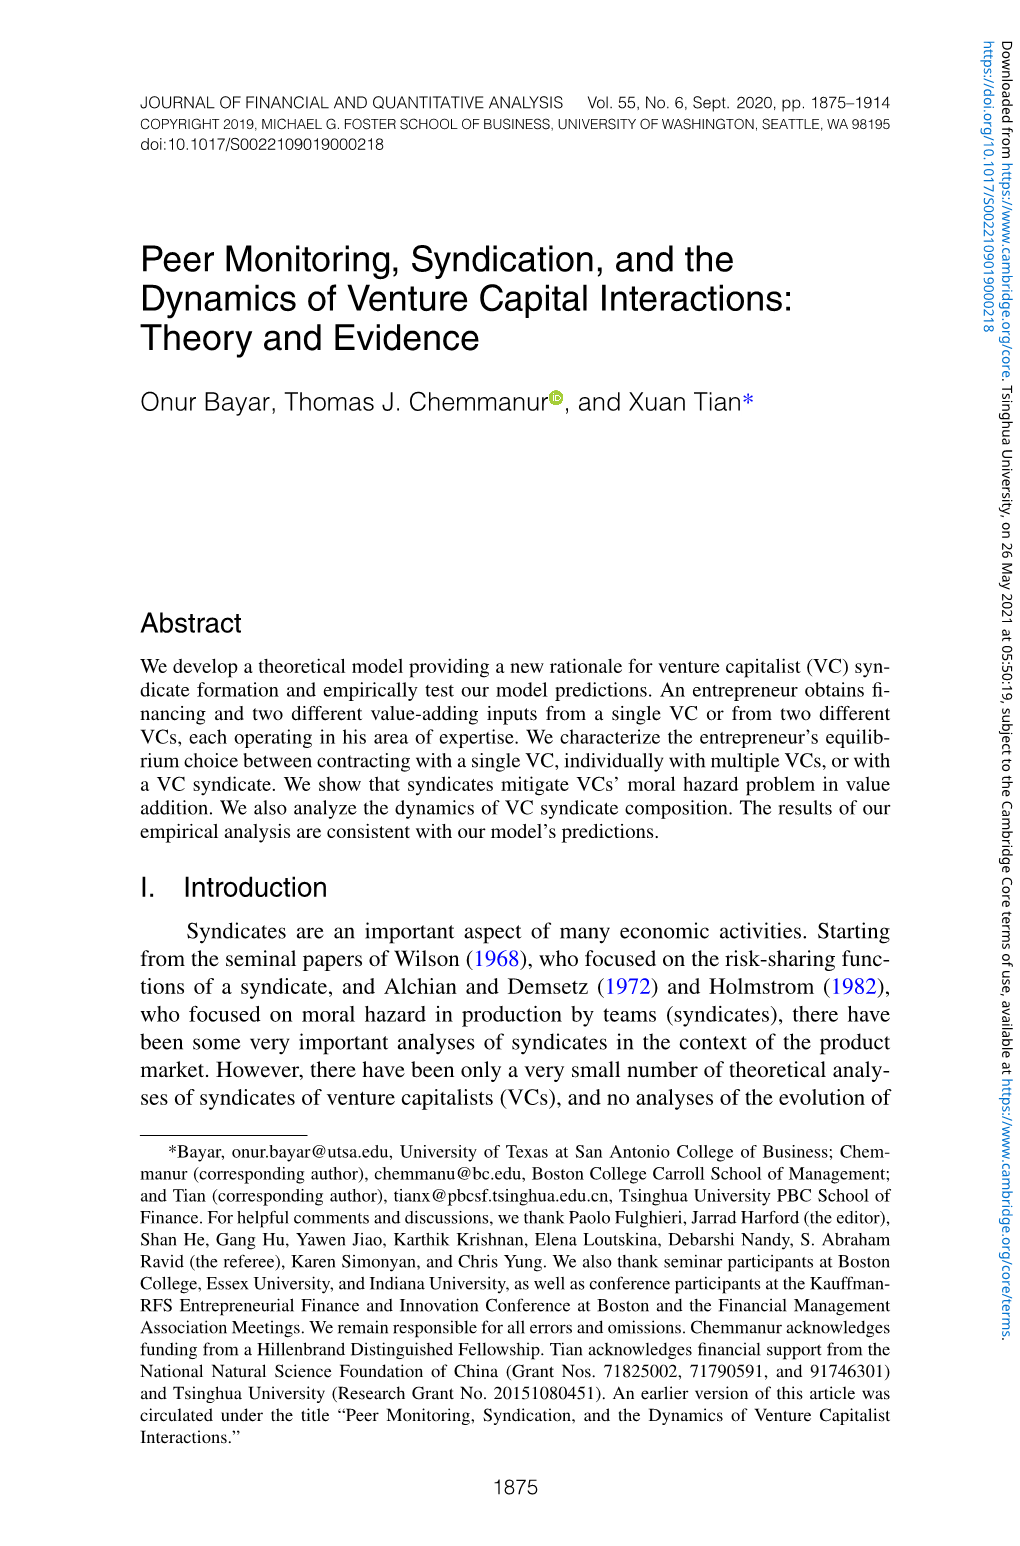 Peer Monitoring, Syndication, and the Dynamics of Venture Capital Interactions: Theory and Evidence